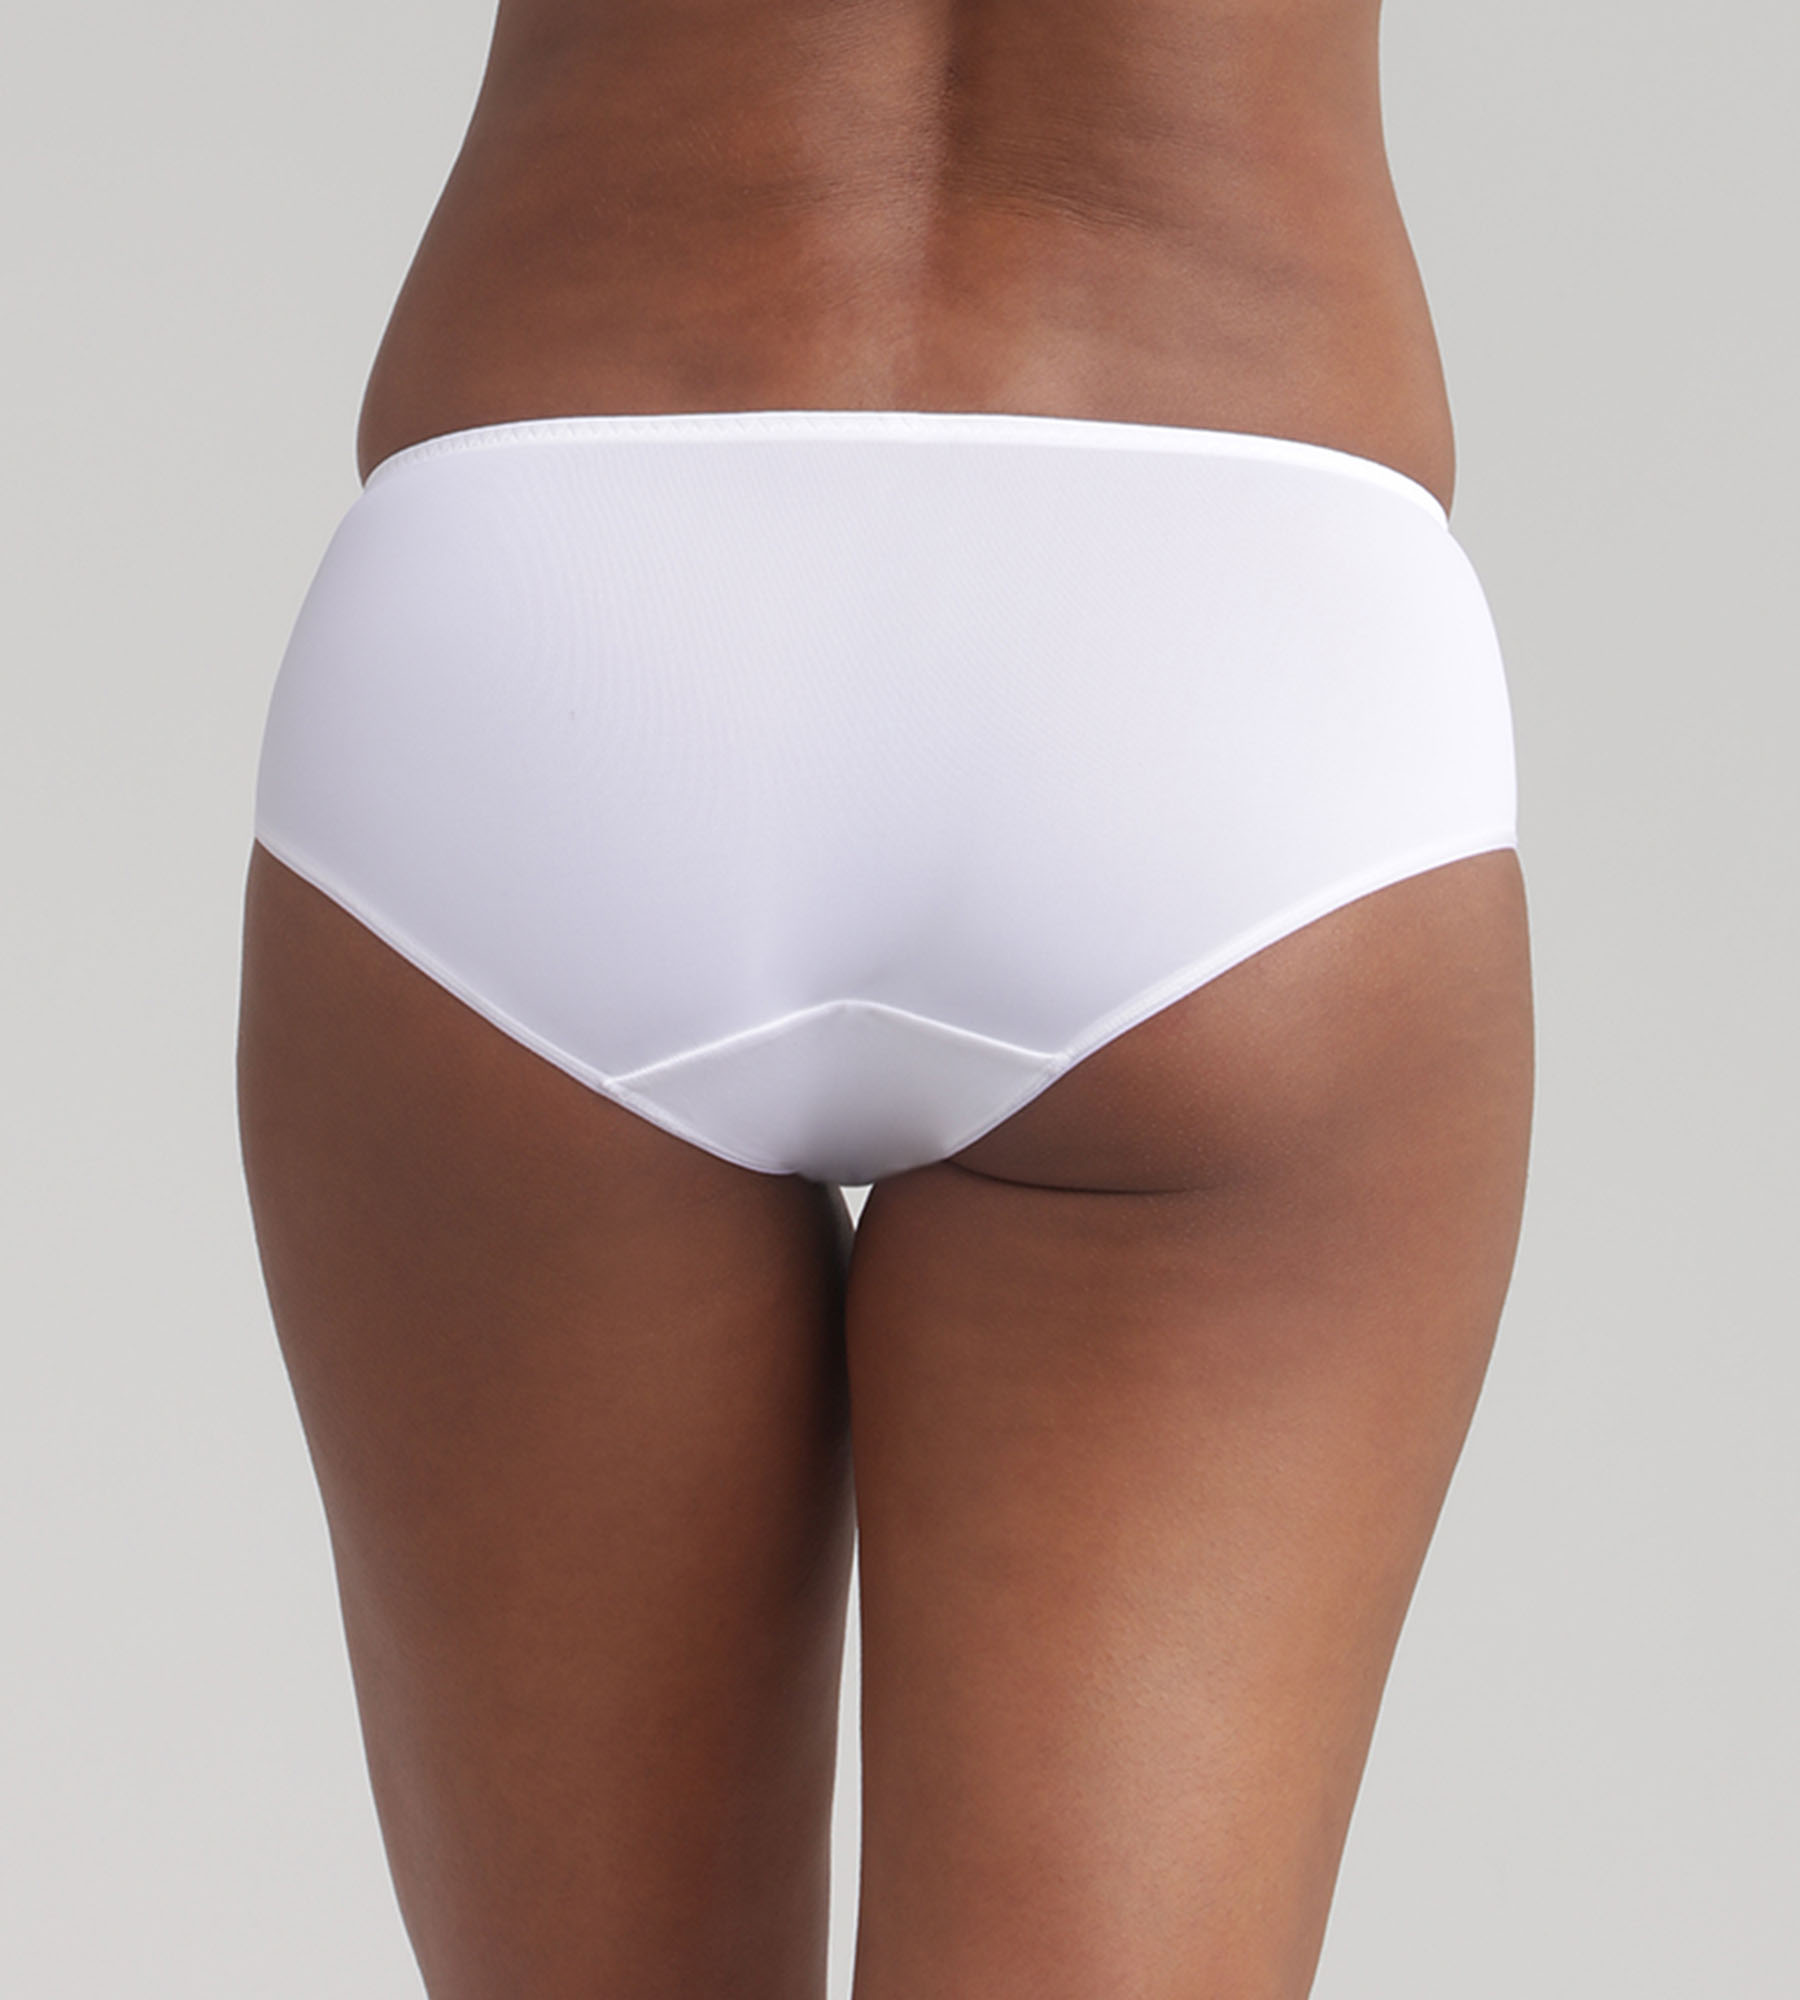 Midi knickers in white Essential Elegance Embroidery, , PLAYTEX